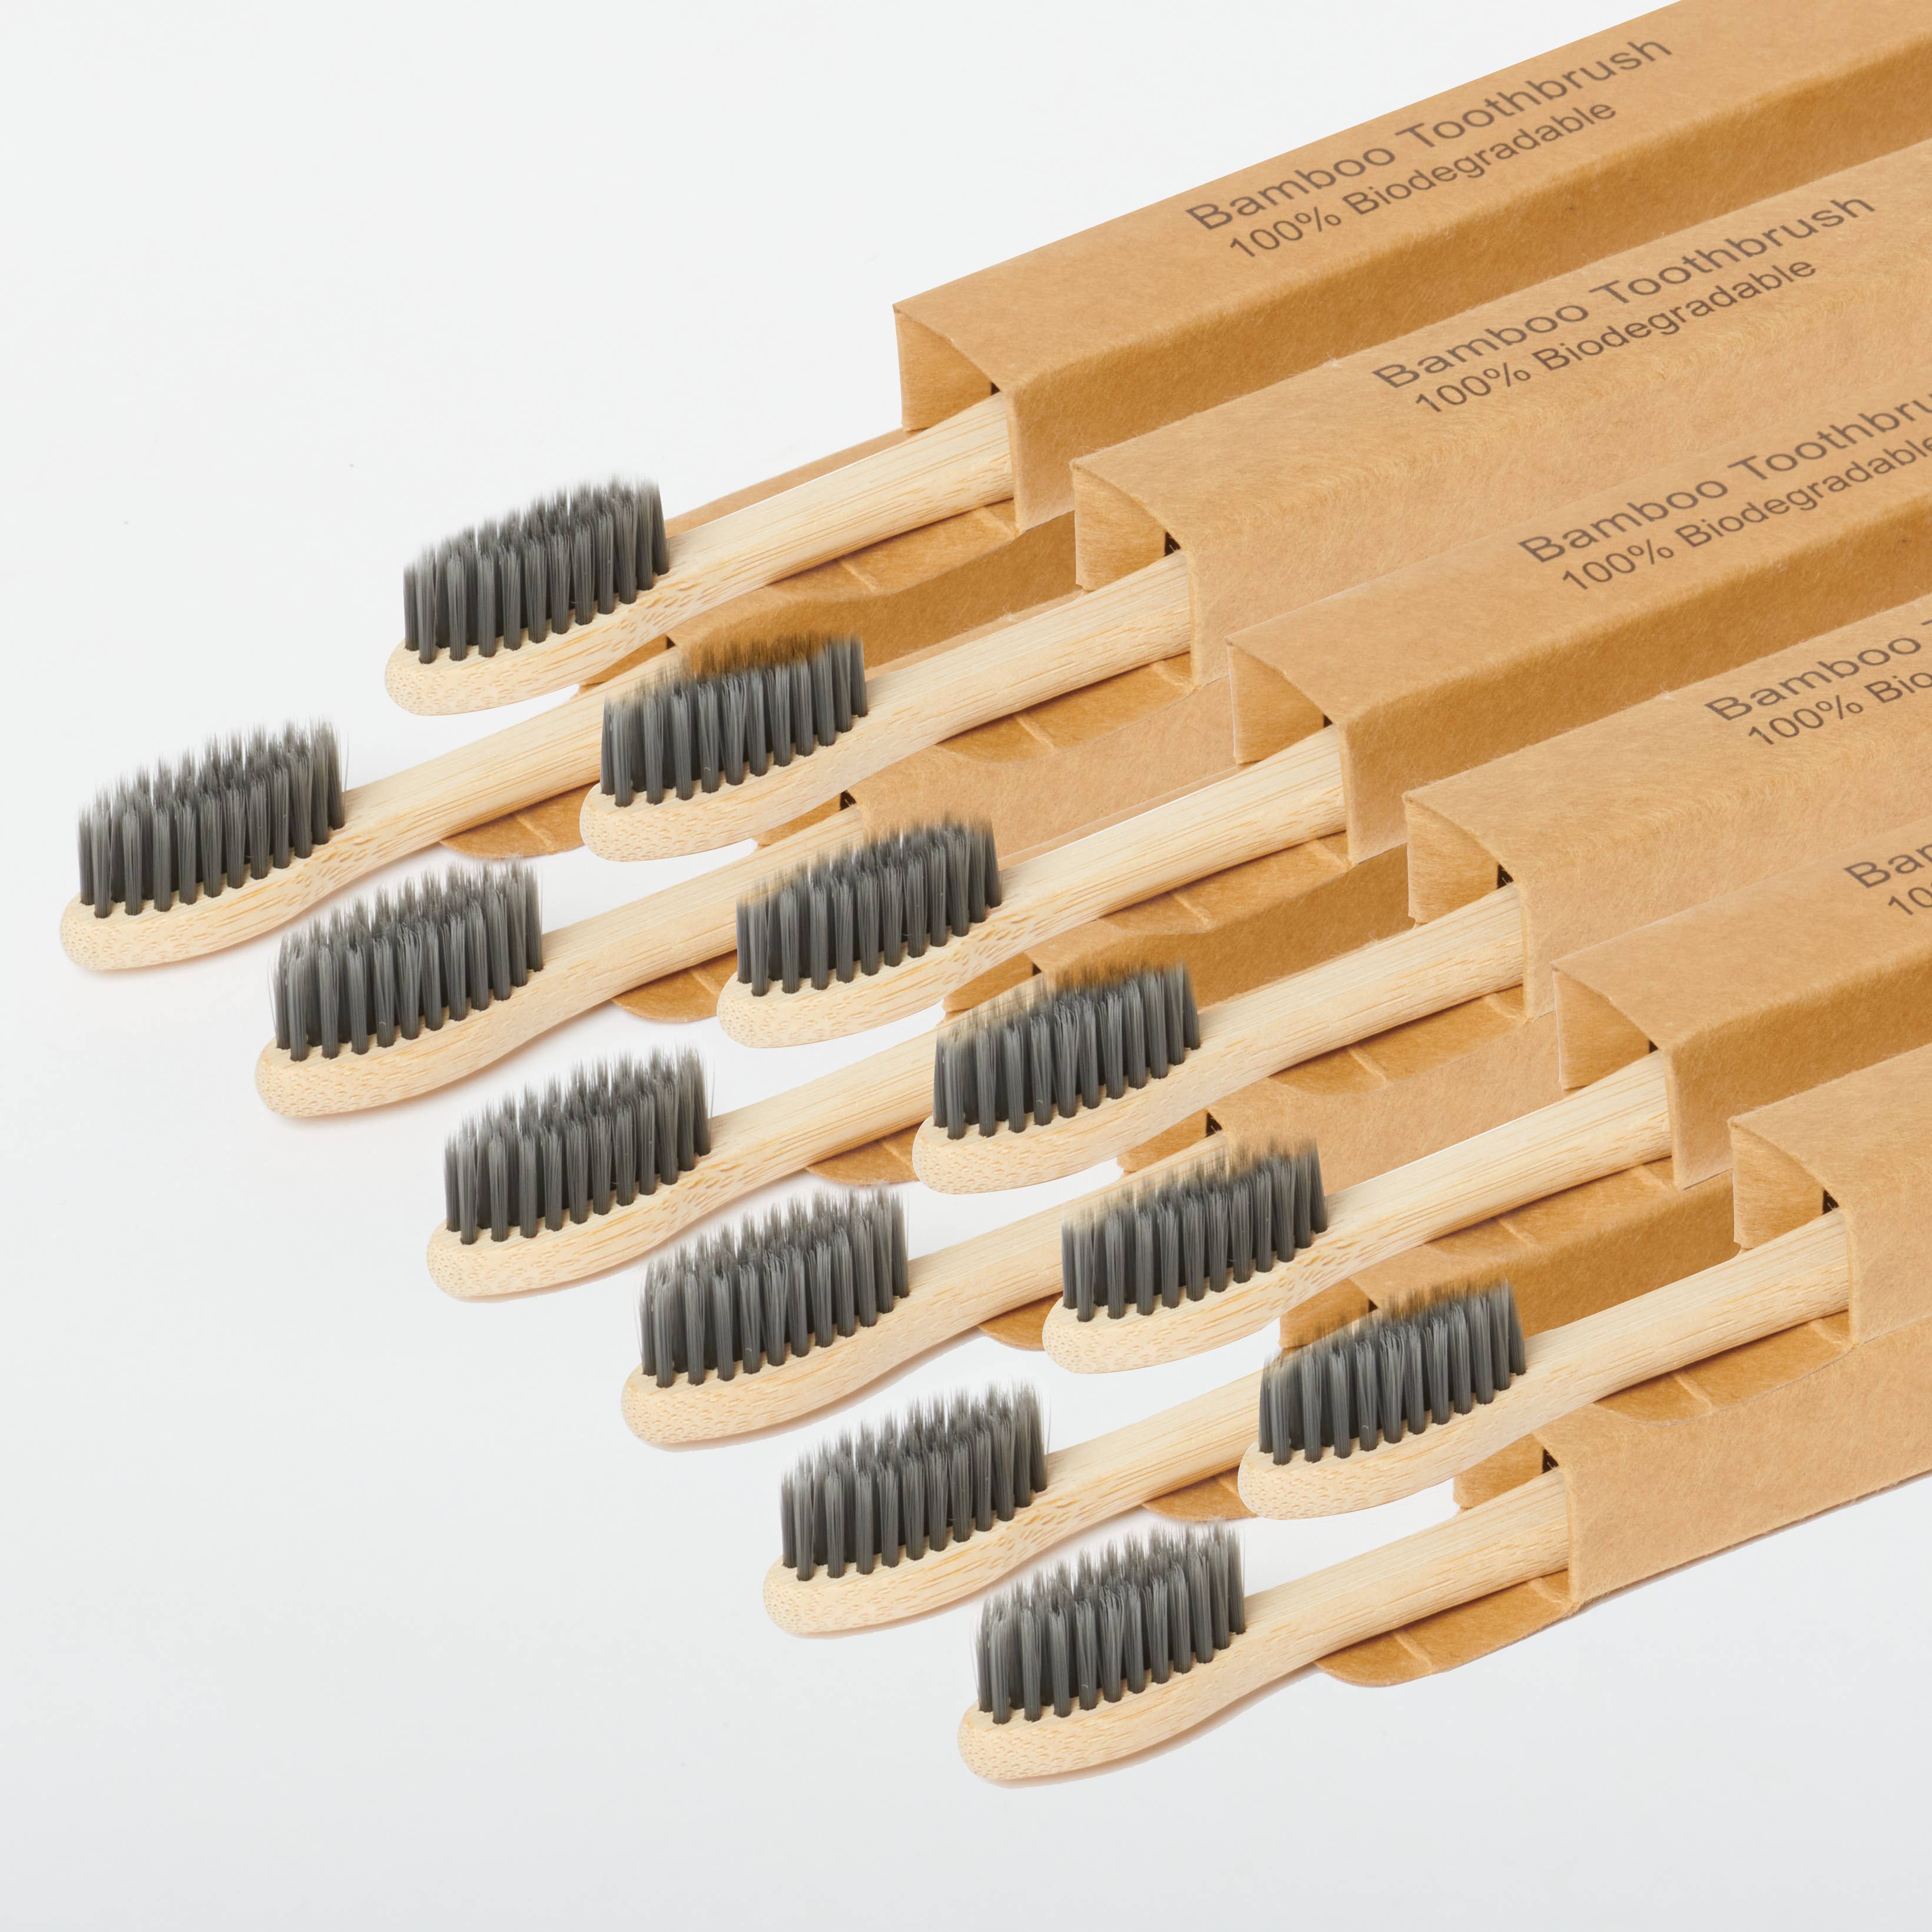 Desesh - Bamboo Toothbrushes (Unbranded, Individual Cardboard Boxes)